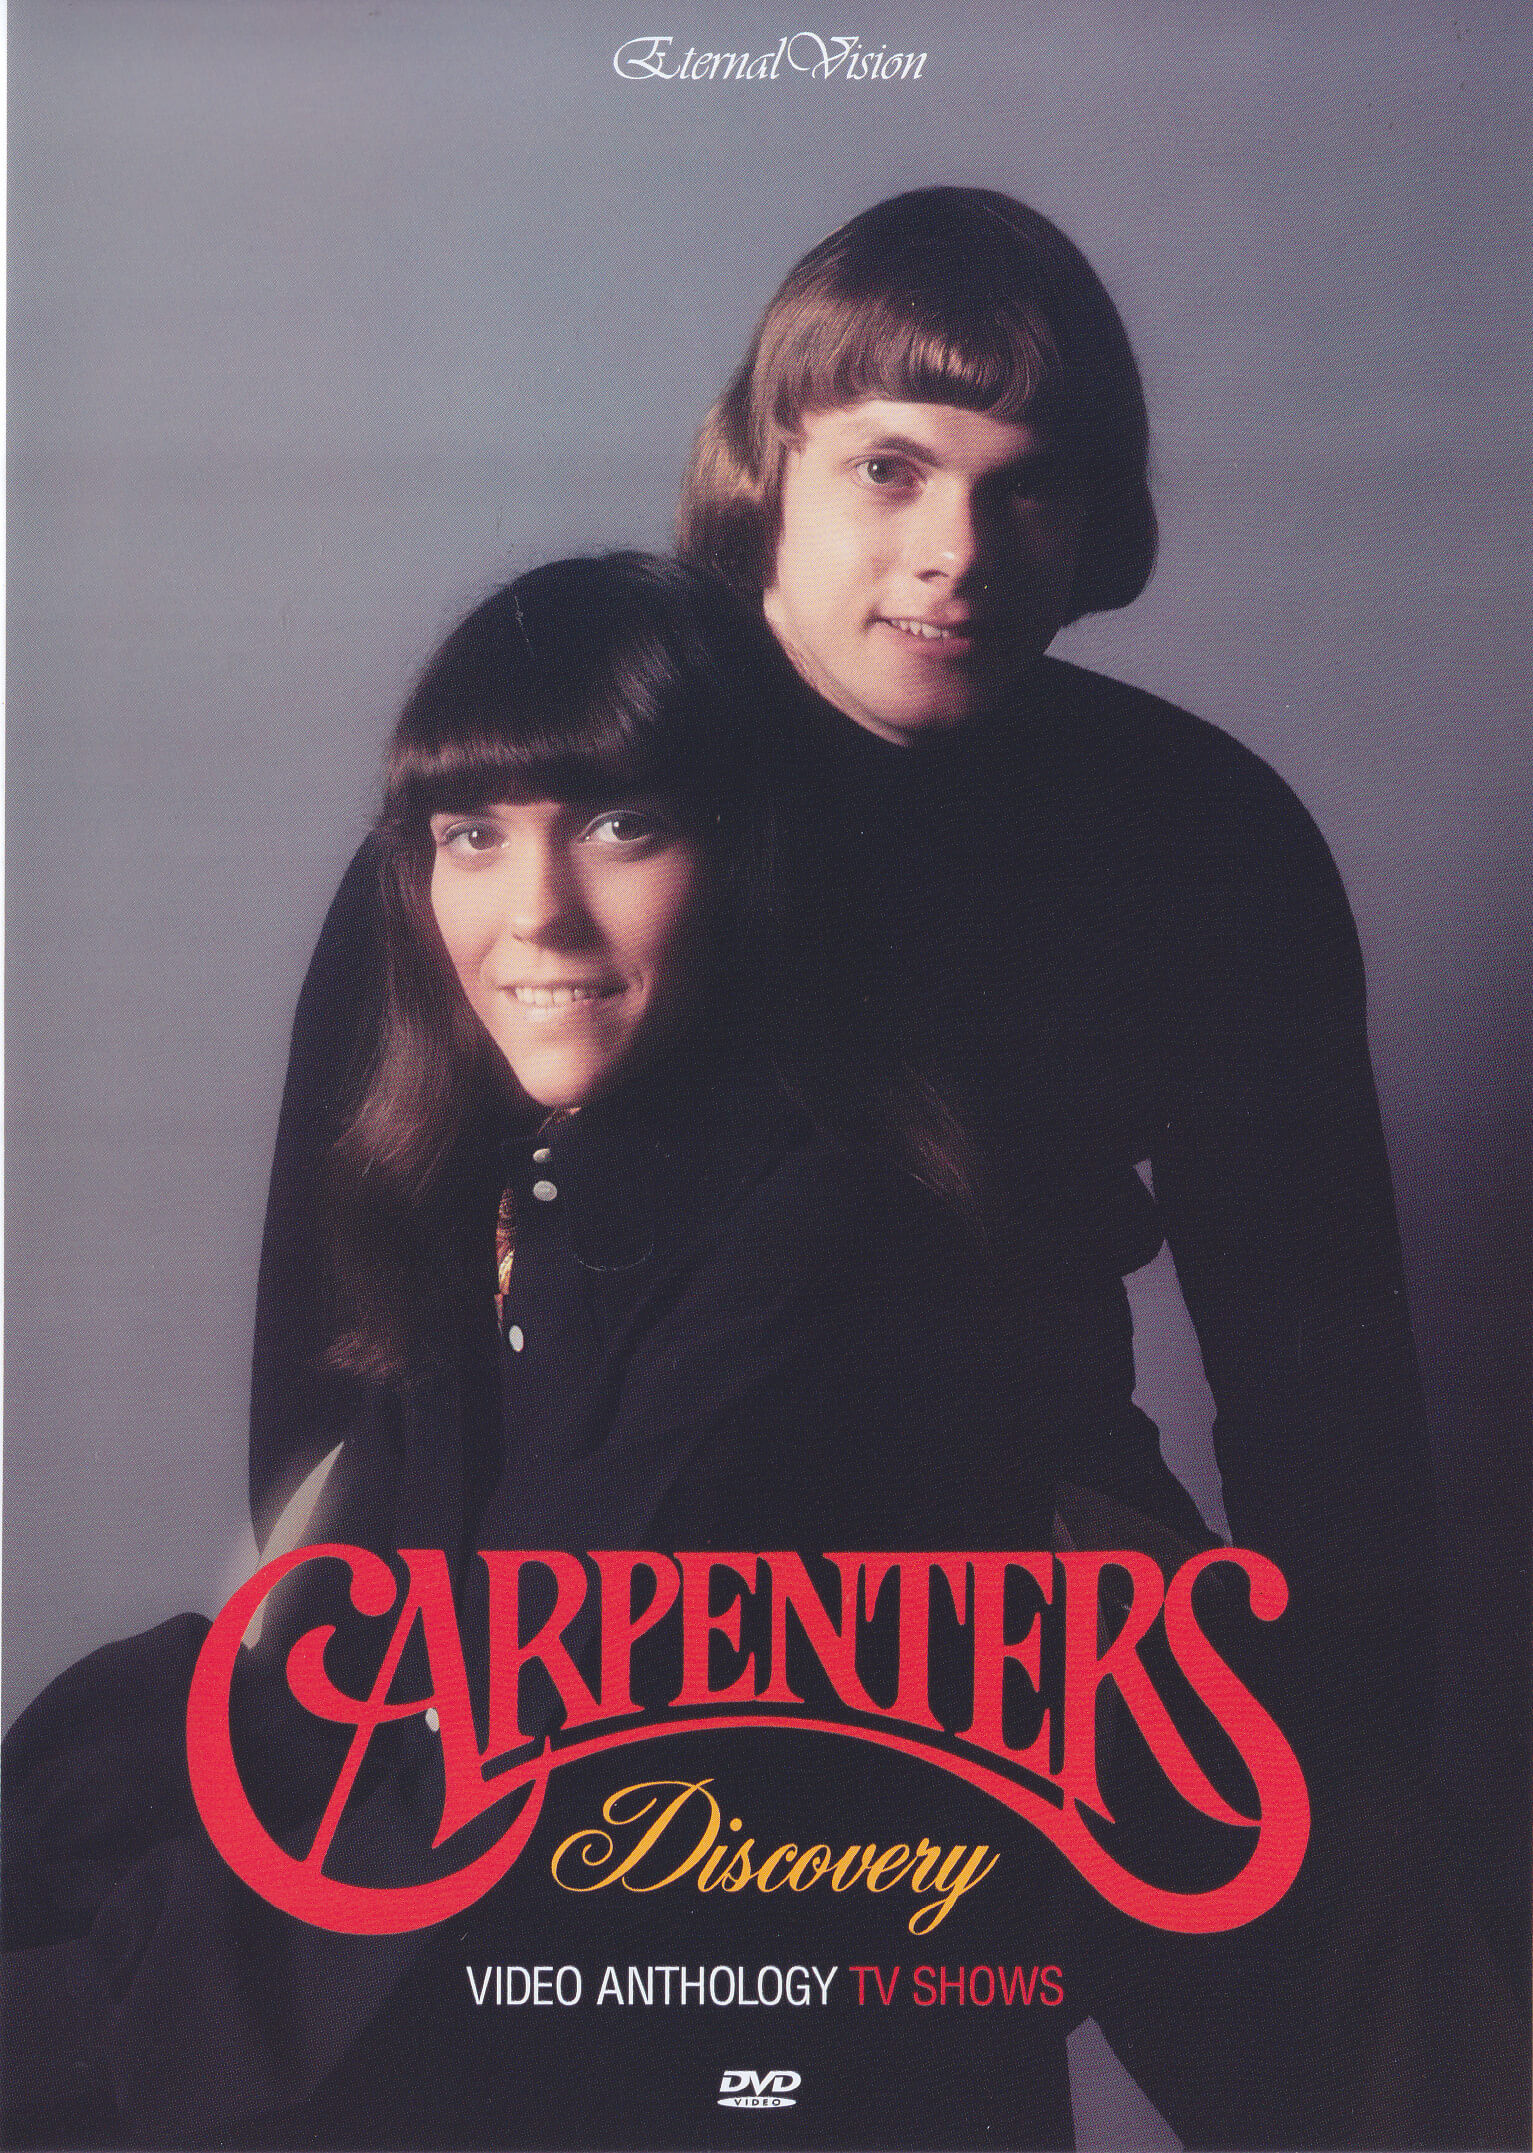 Carpenters / Discovery Video Anthology TV Shows / 2DVD – GiGinJapan